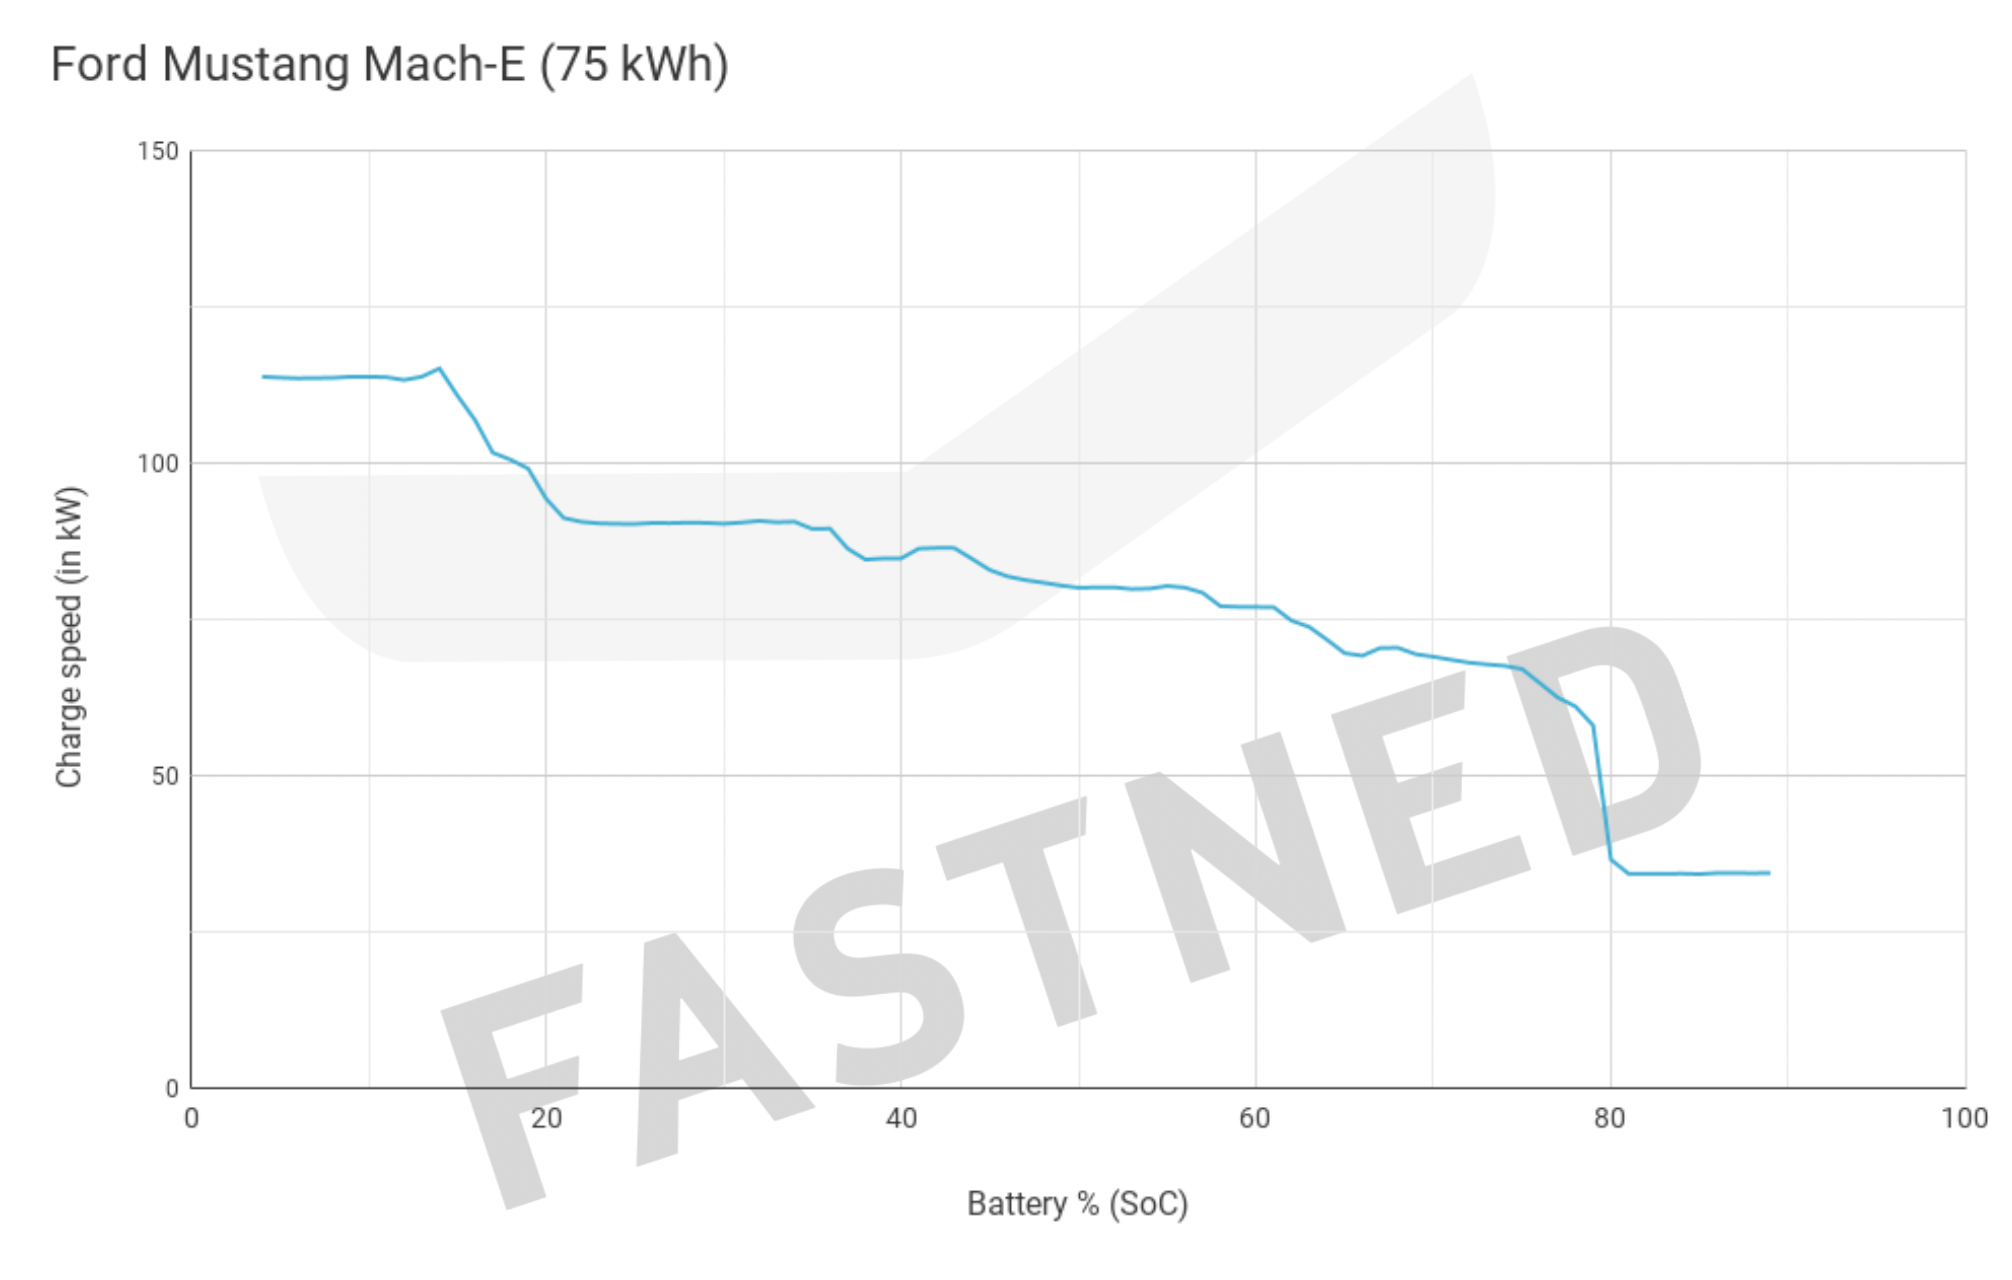 Chargecurve_Ford_Mach-e_SR.png